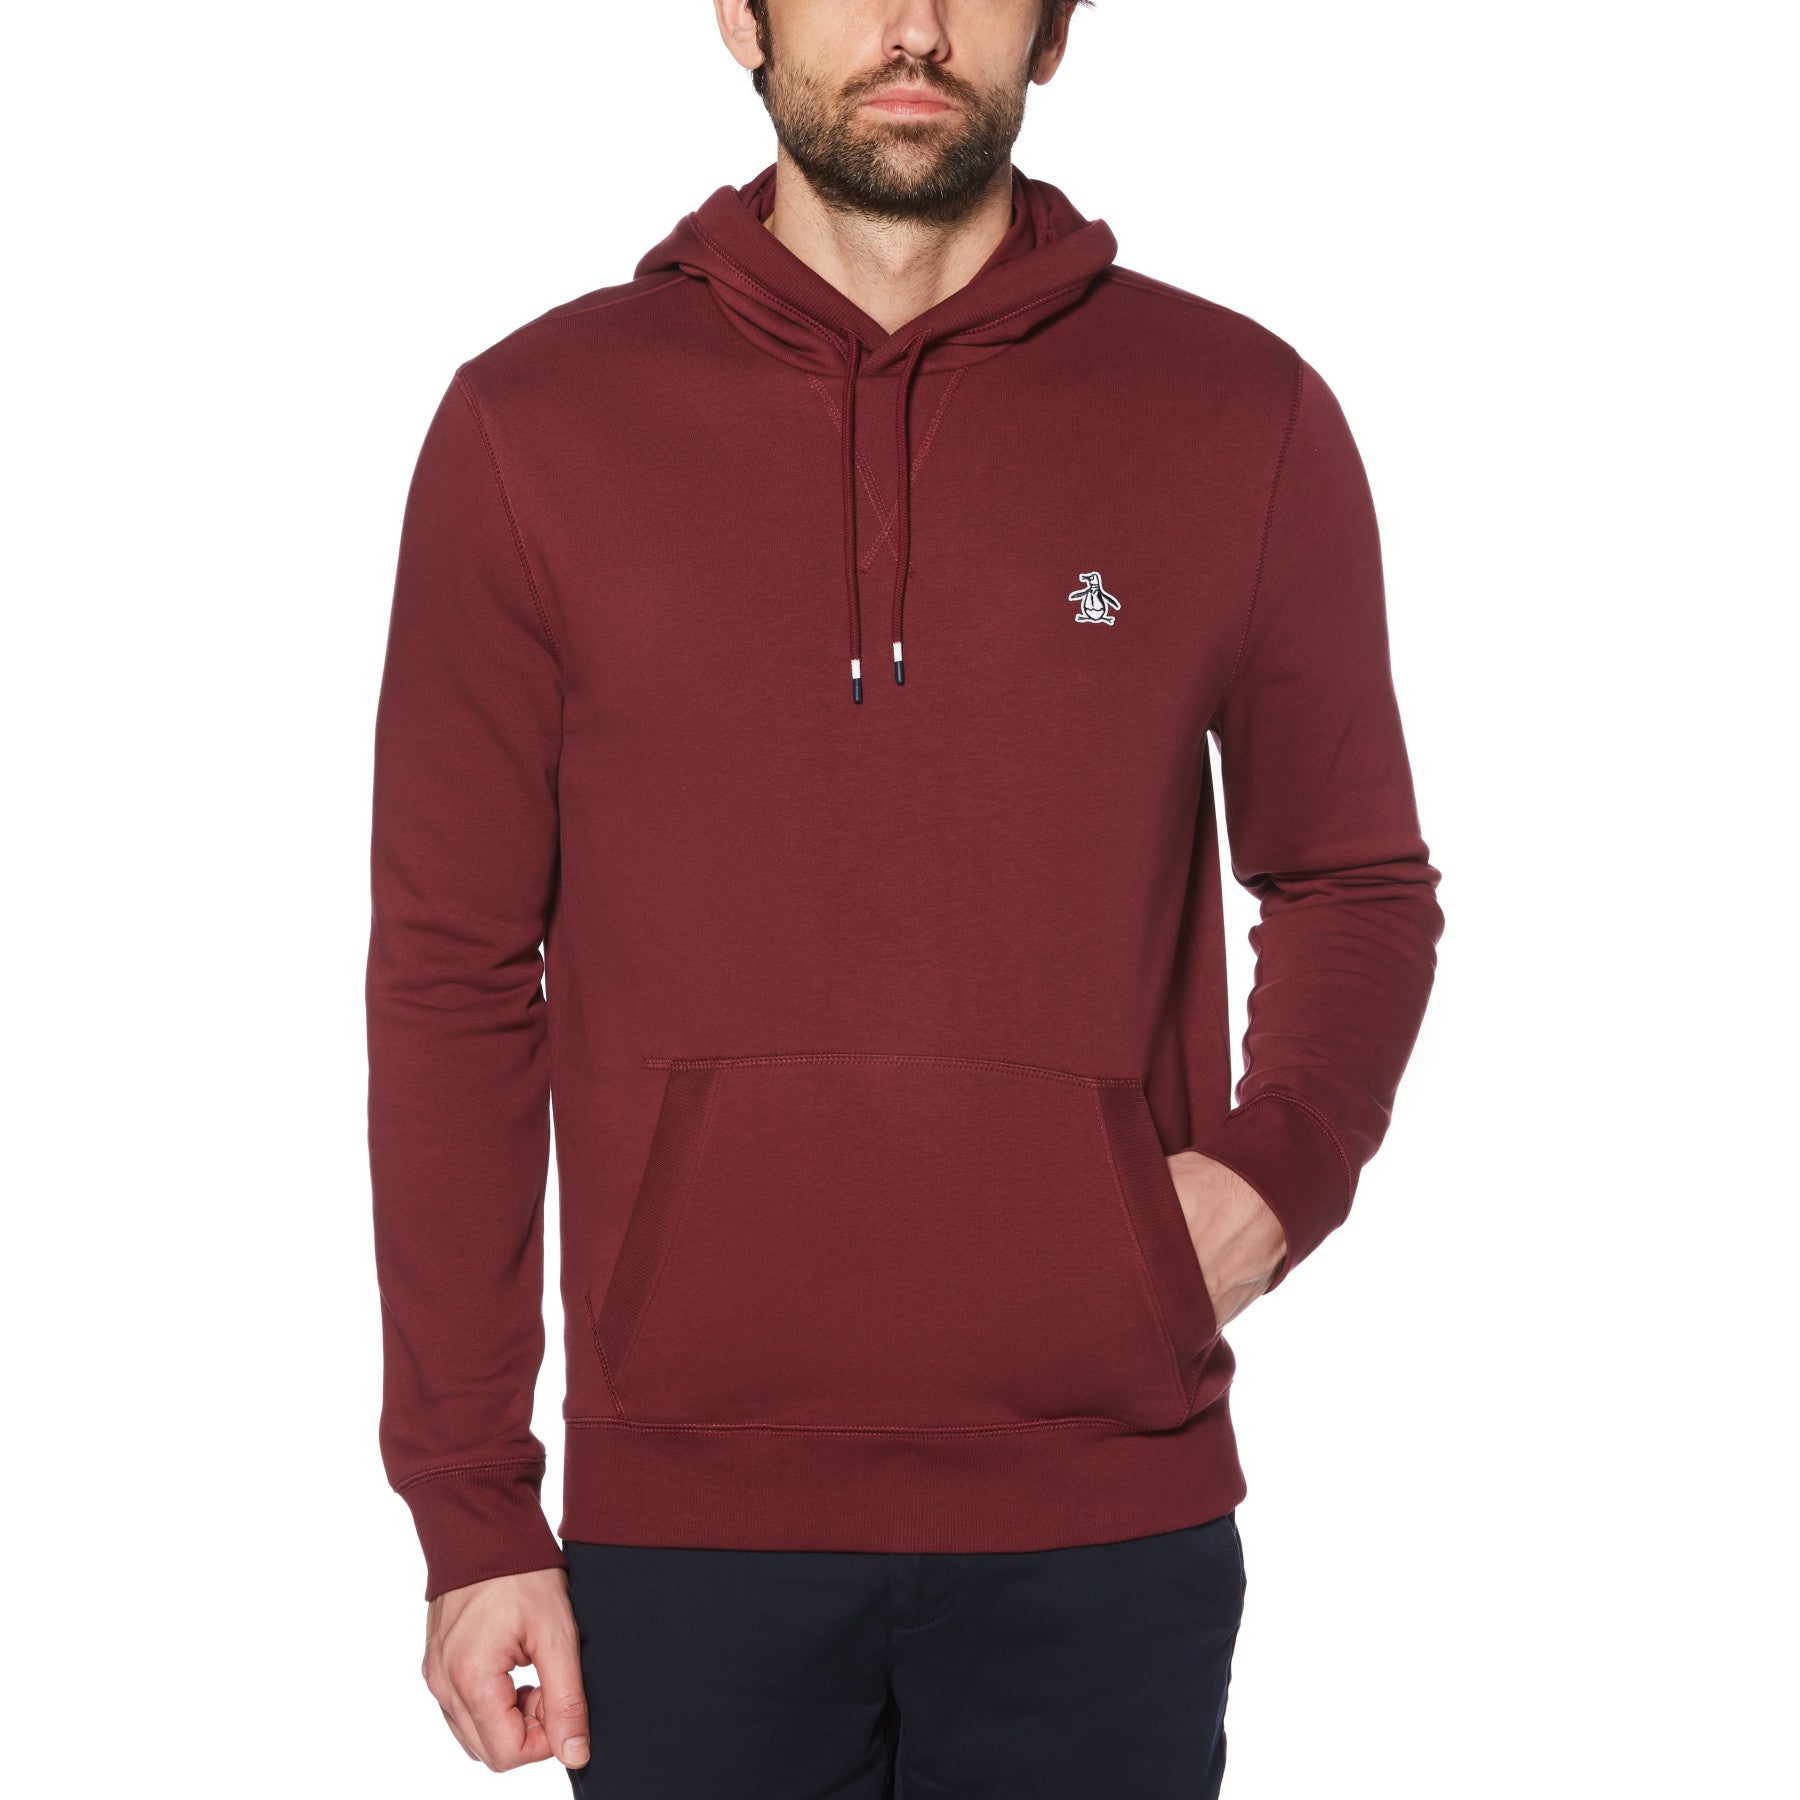 View Sticker Pete Organic Cotton Fleece Pullover Hoodie In Tawny Port information